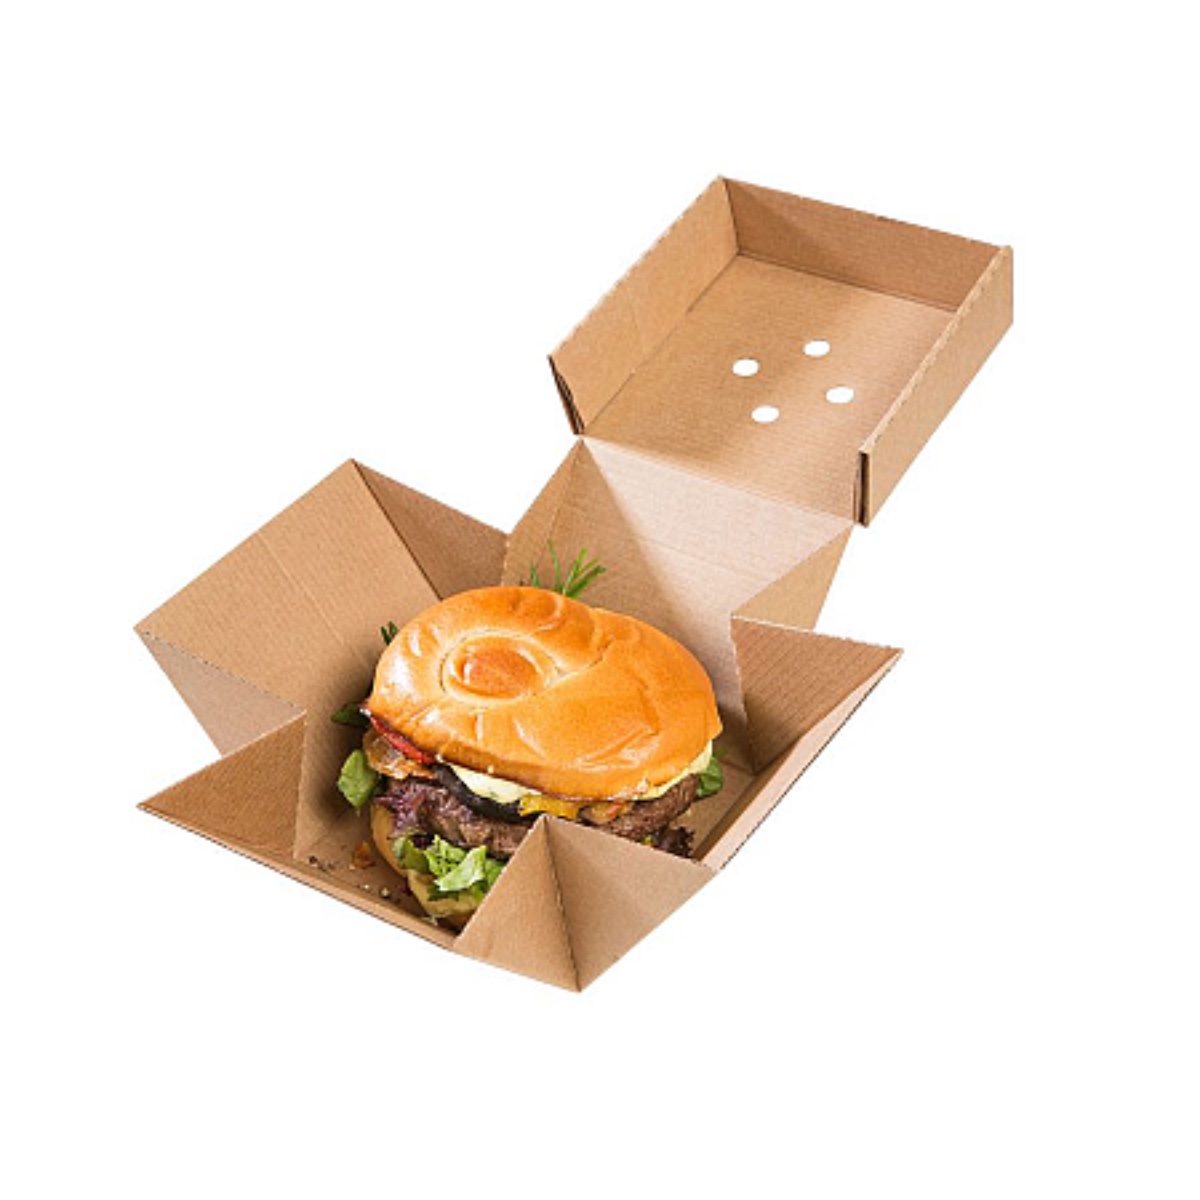 In today's competitive business landscape, it's crucial for restaurants and fast-food chains to stand out. How can you customize a burger box?